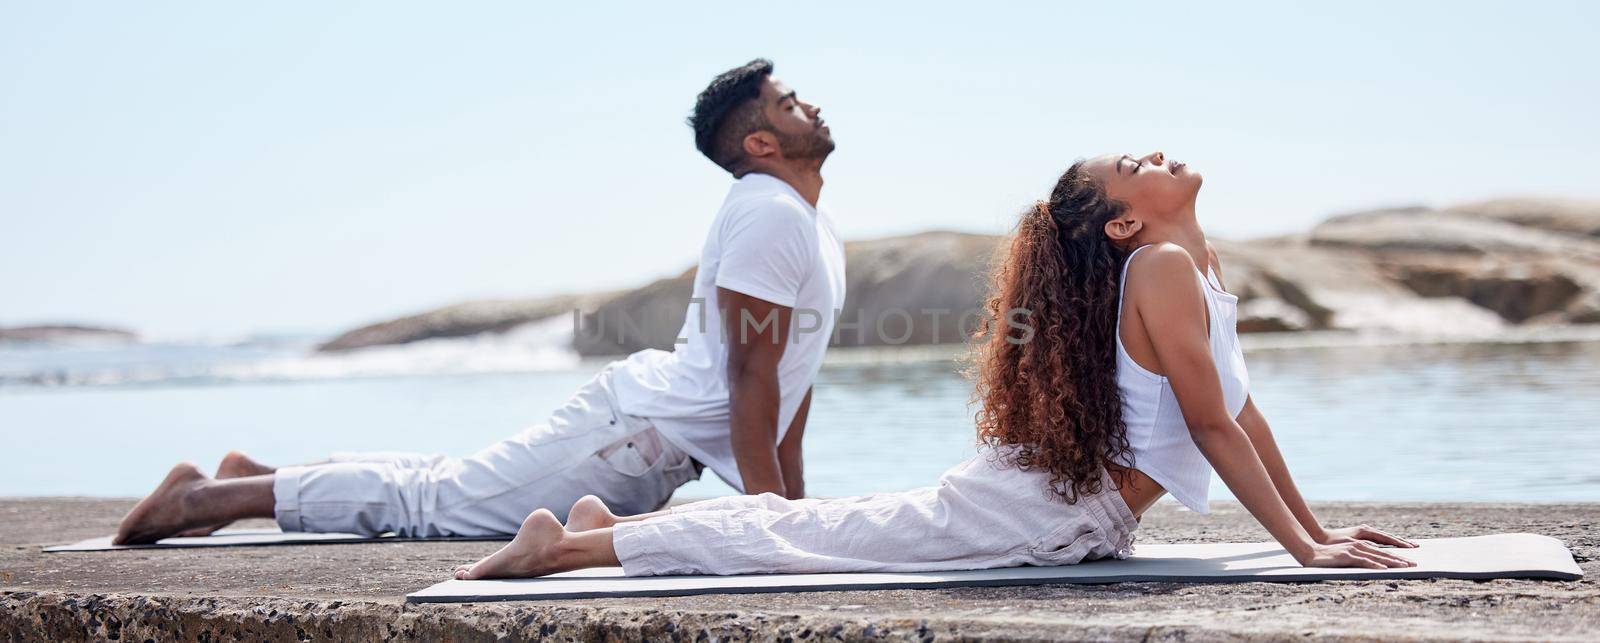 Full length shot of a young couple practicing yoga at the beach.